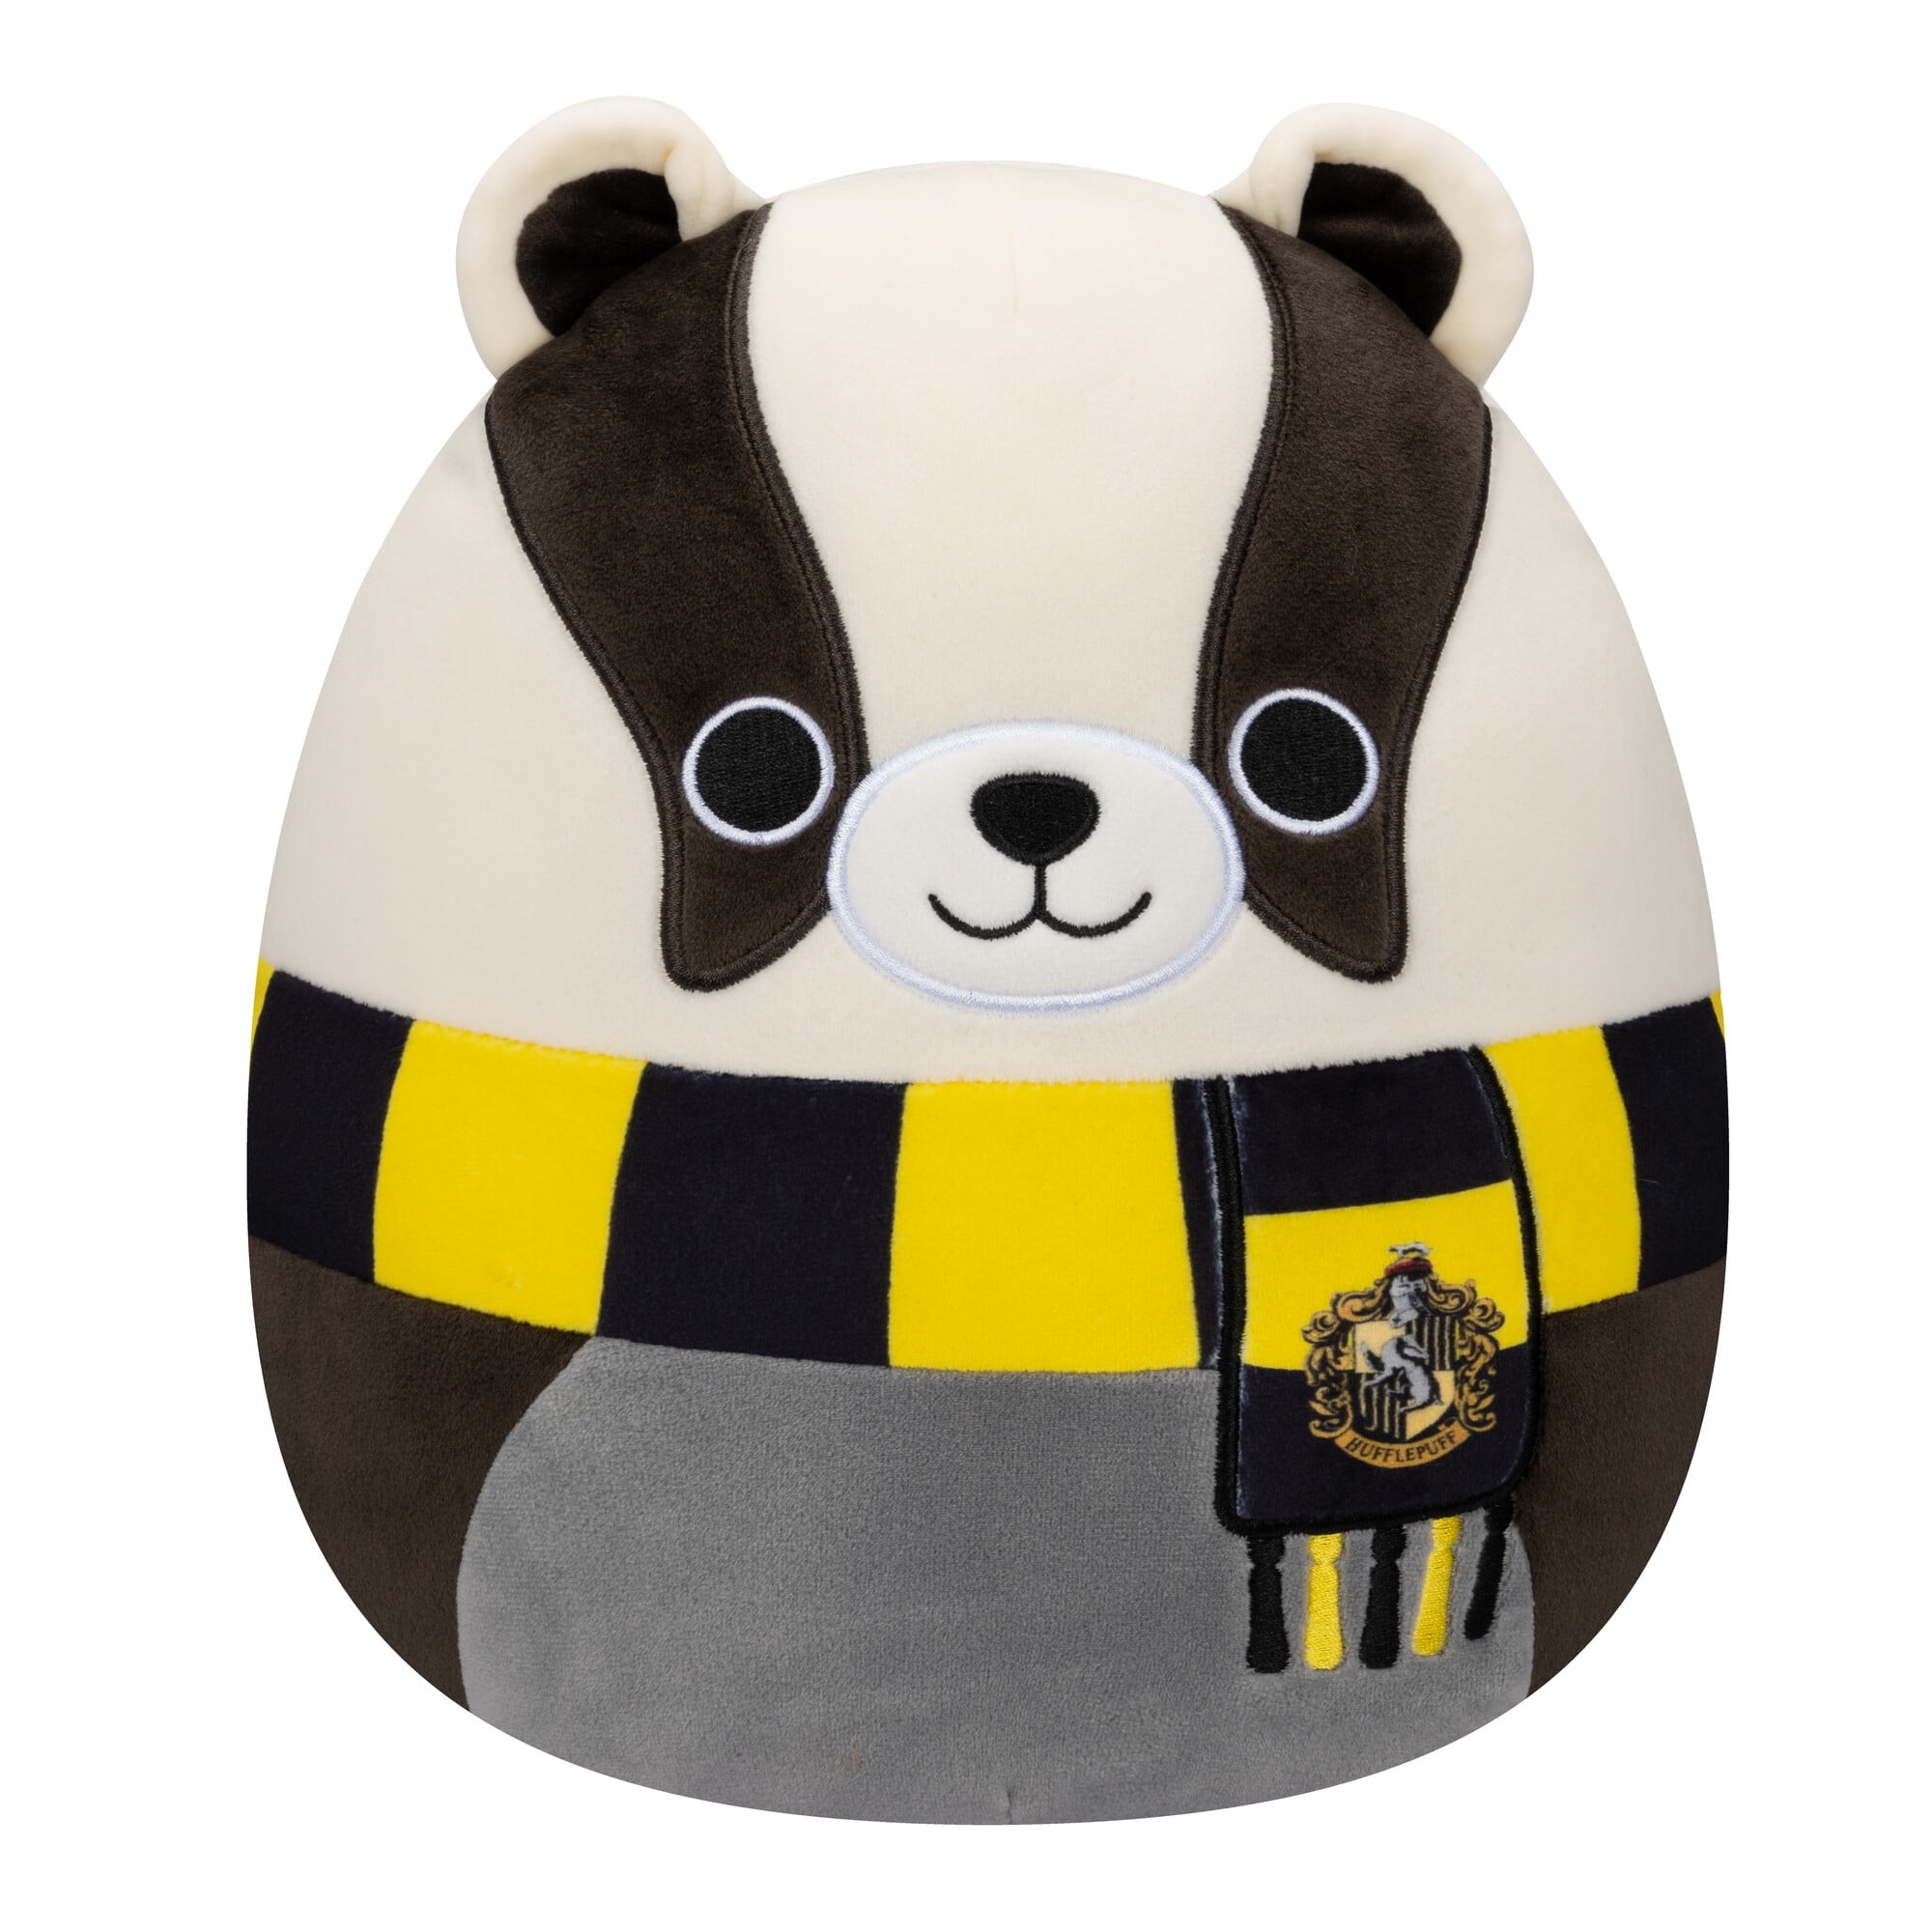 Jazwares' Harry Potter Squishmallows Arrive this Fall - The Toy Book